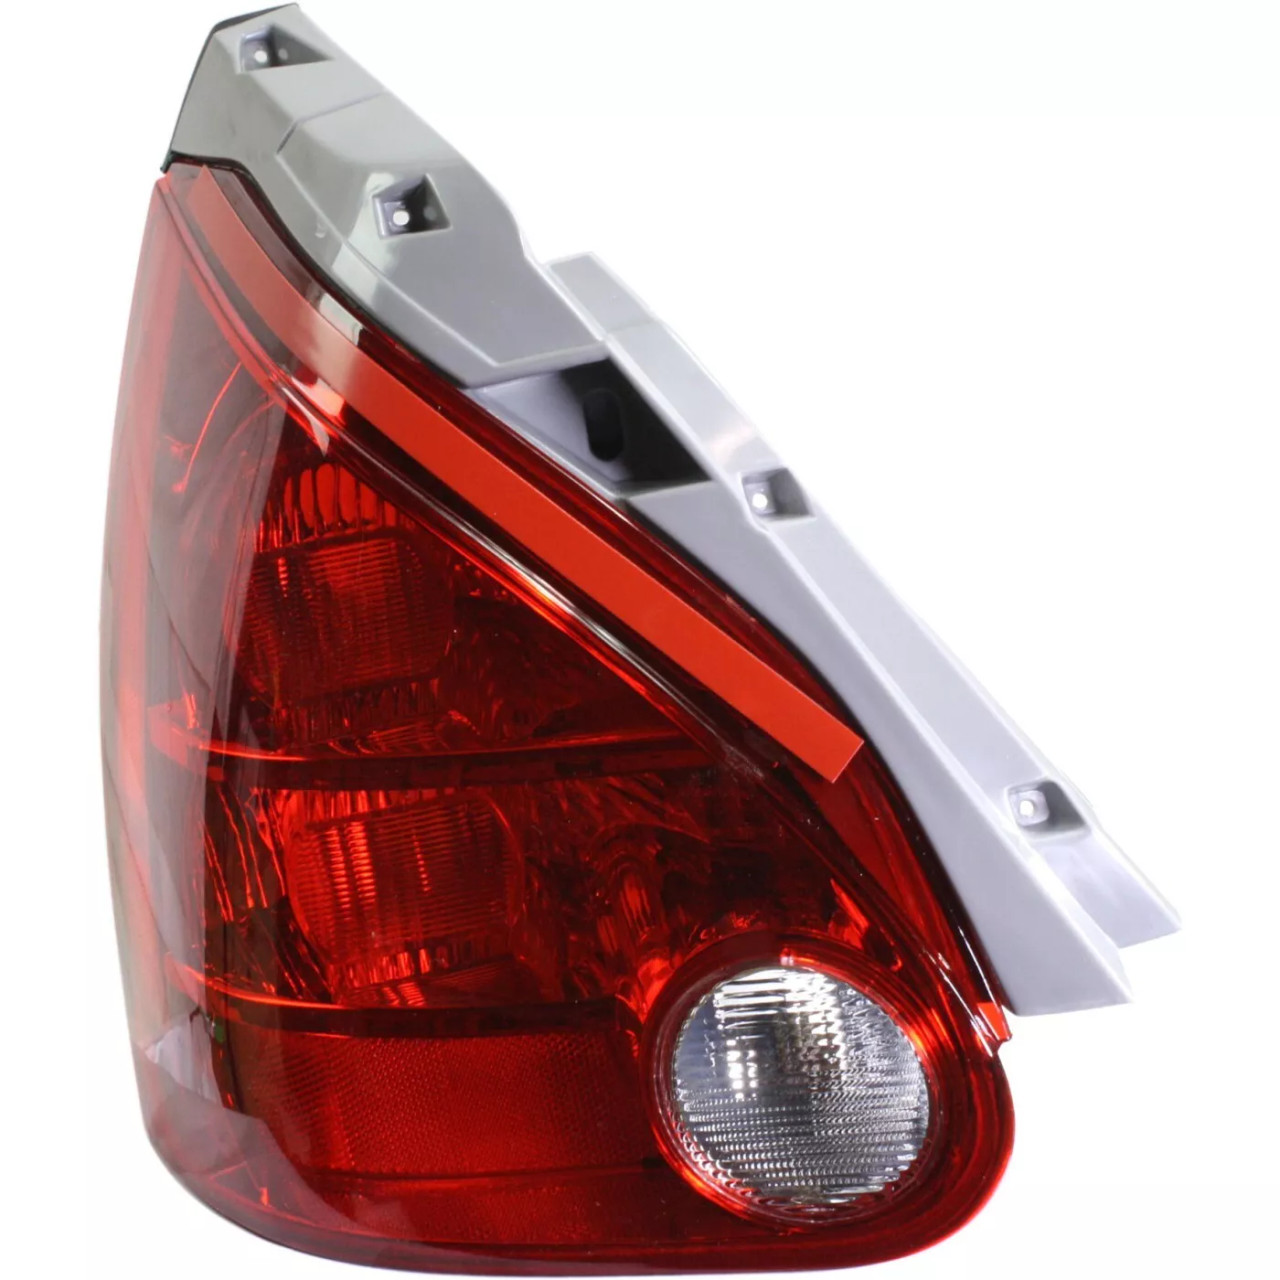 Halogen Tail Light For 2004-2008 Nissan Maxima Left Clear & Red Lens